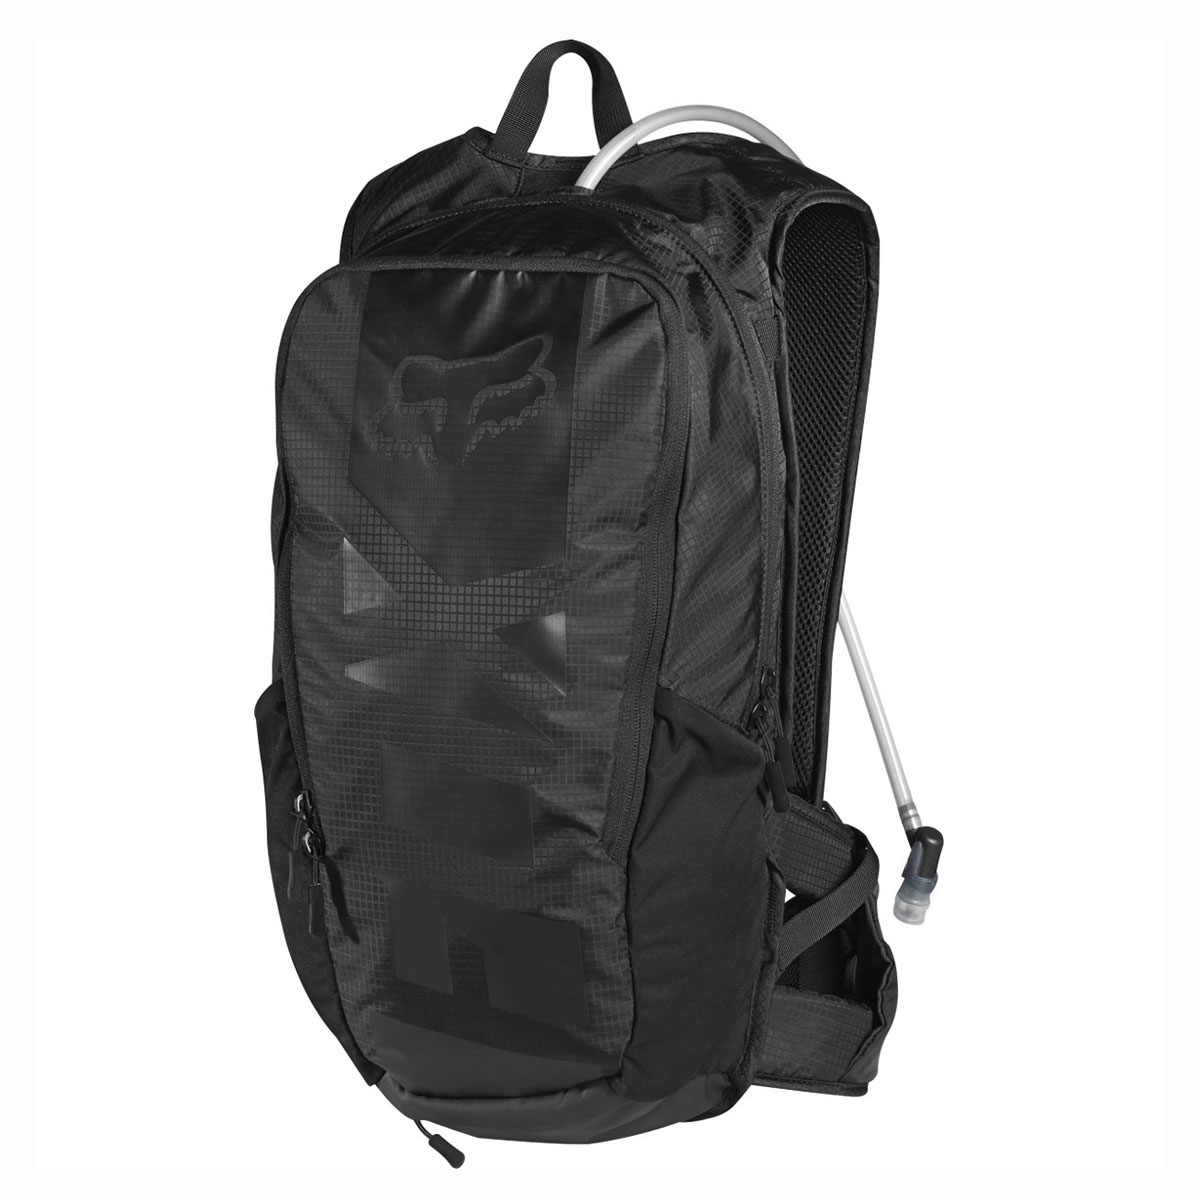 Fox Backpack with Hydration System Compartment Large Camber Race Black